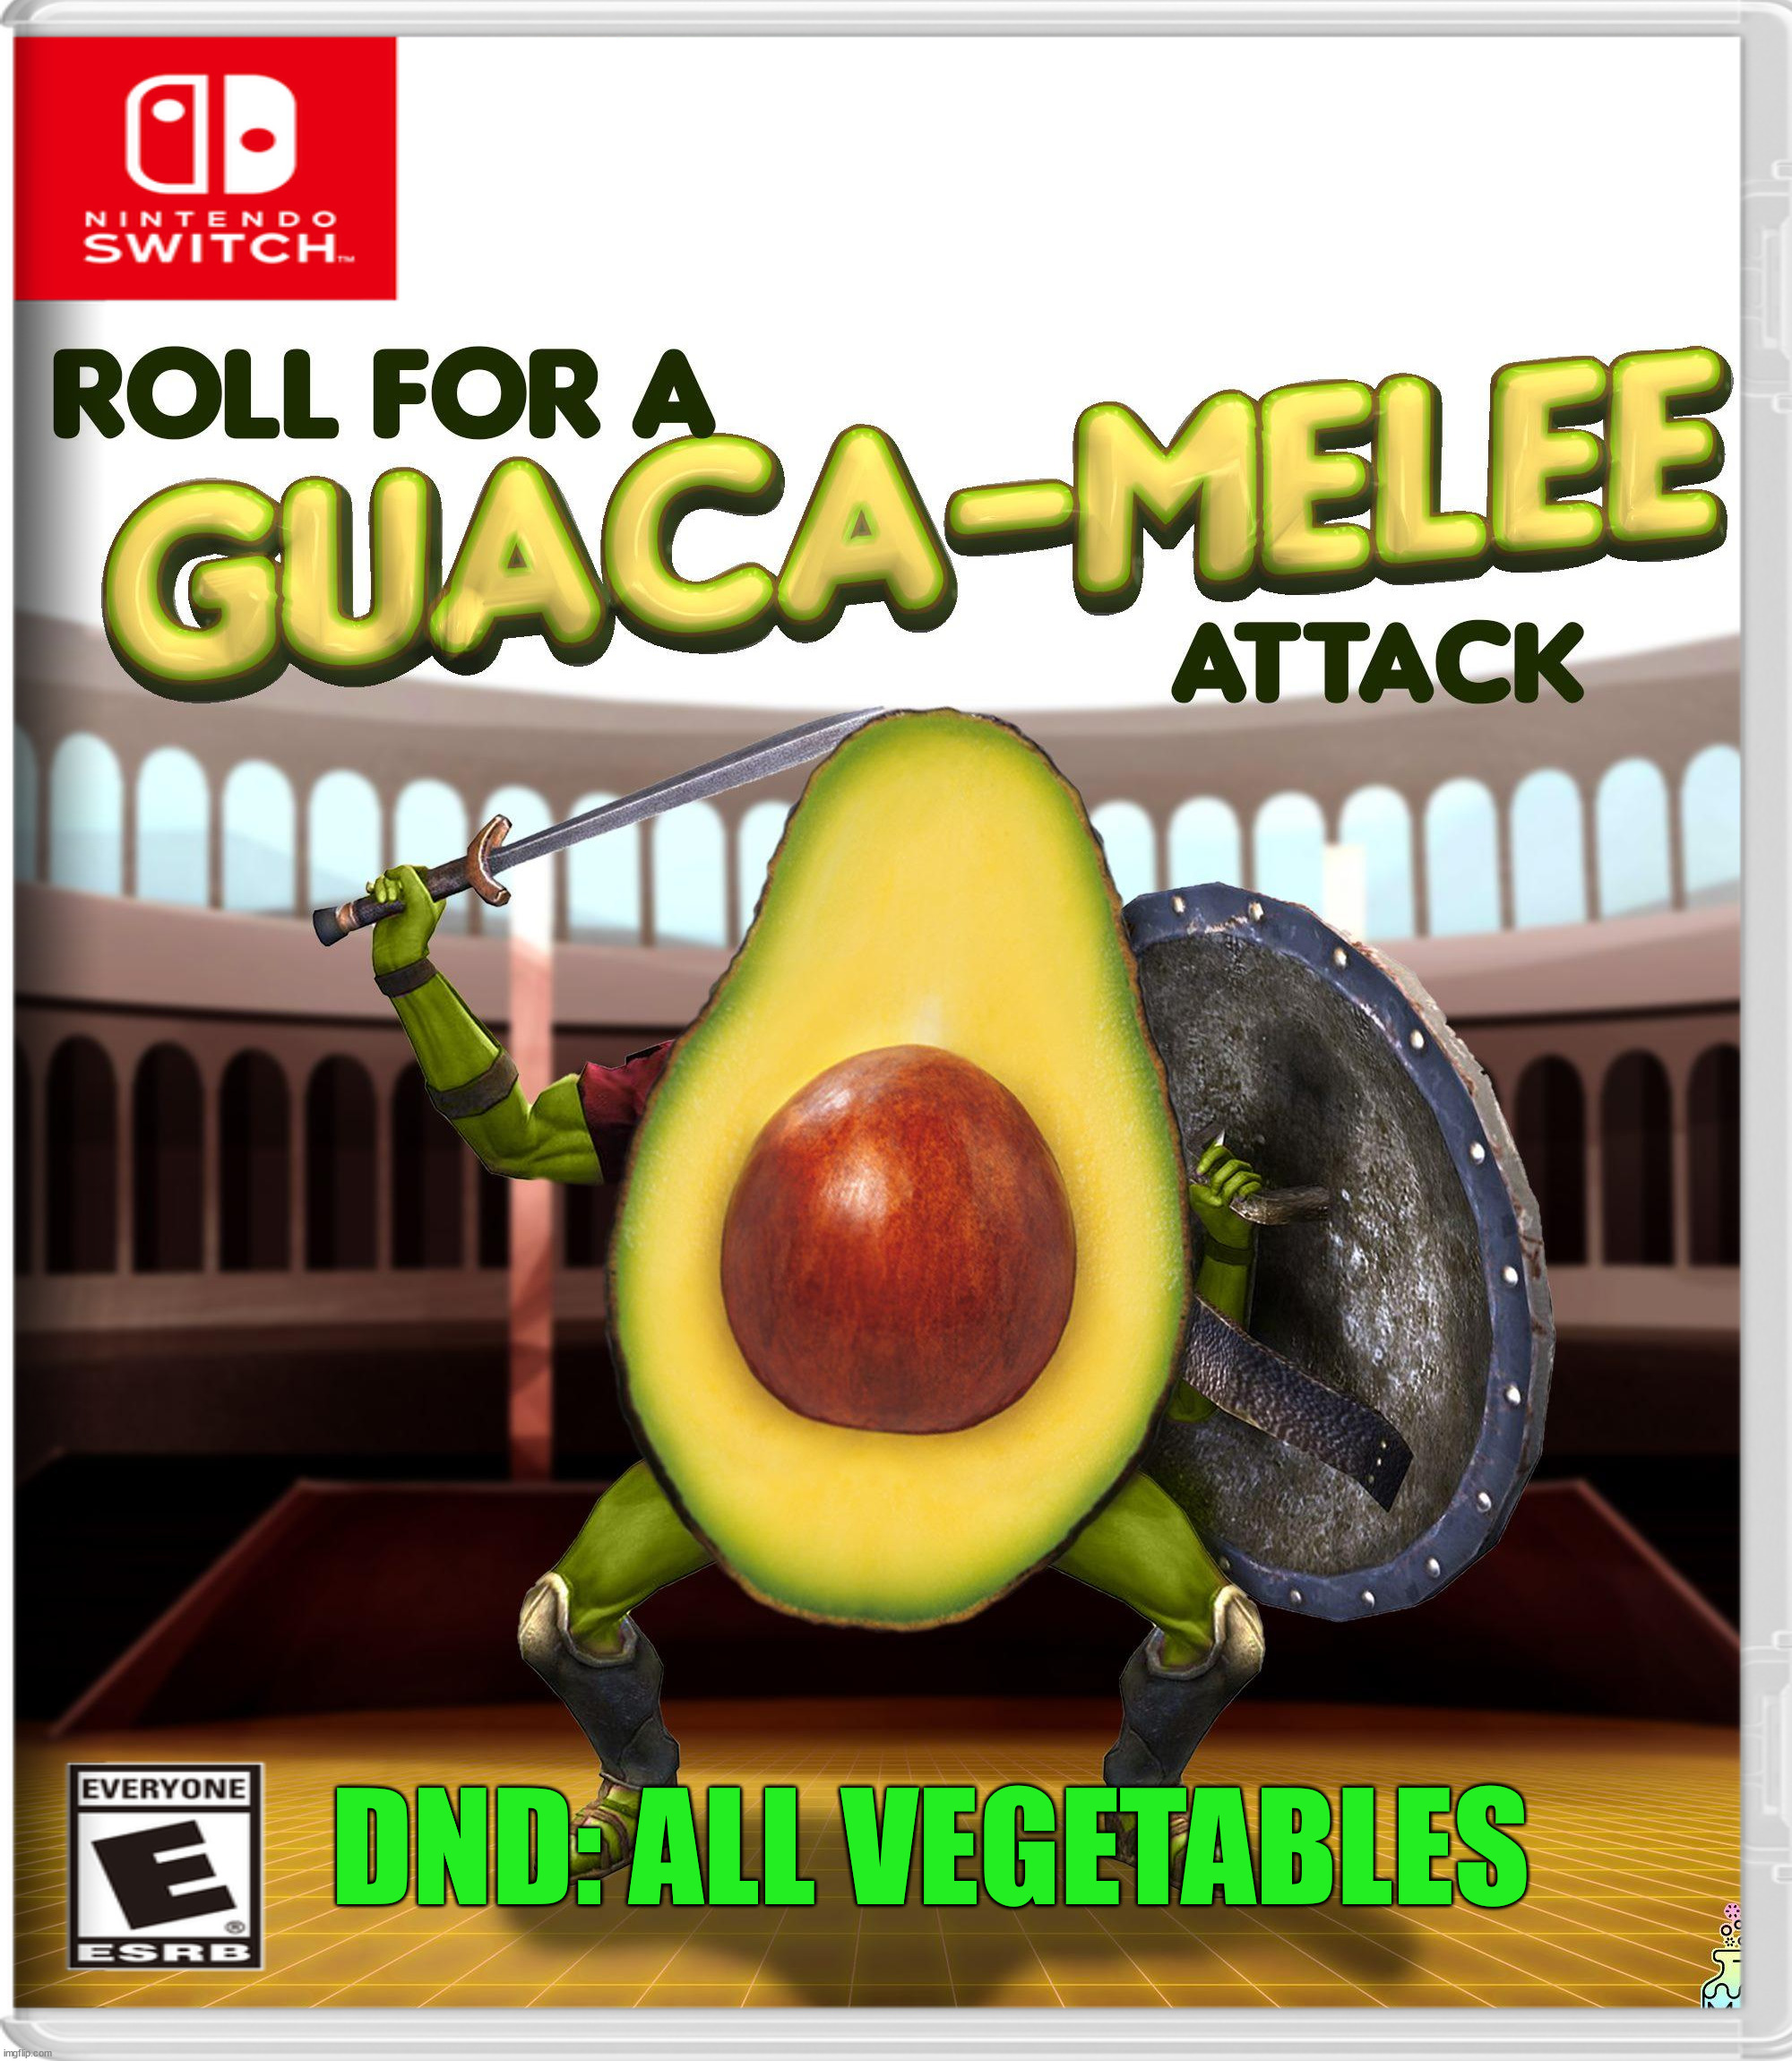 DND: ALL VEGETABLES | image tagged in fake,nintendo switch | made w/ Imgflip meme maker